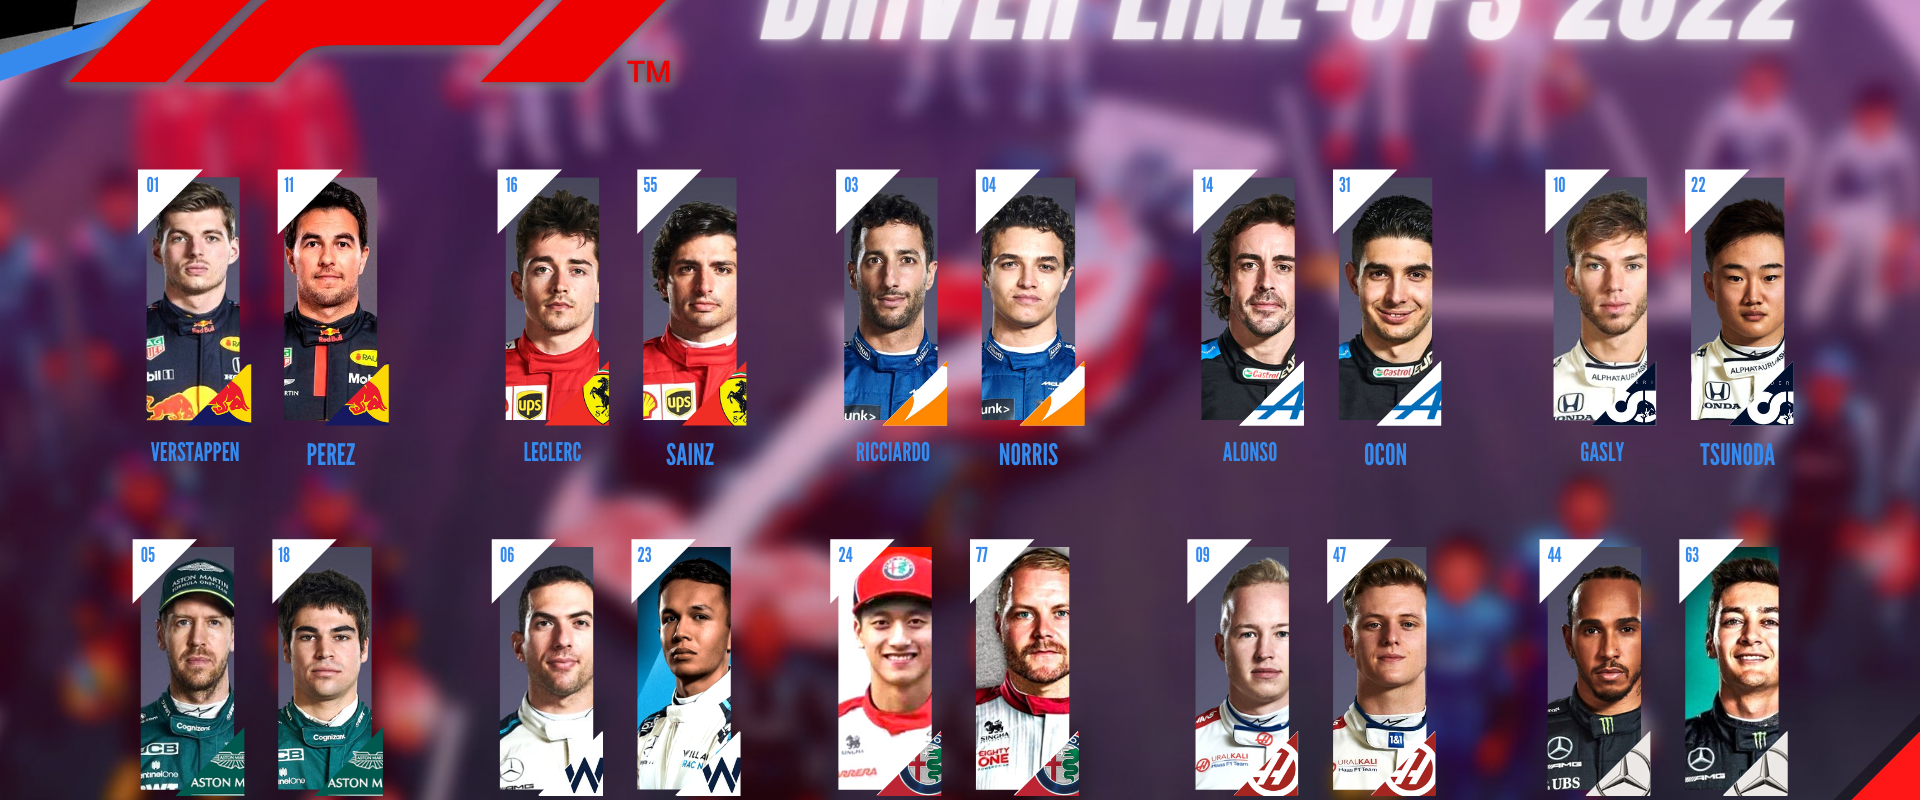 1920x1080_Formula One Teams and Drivers of the 2022 season